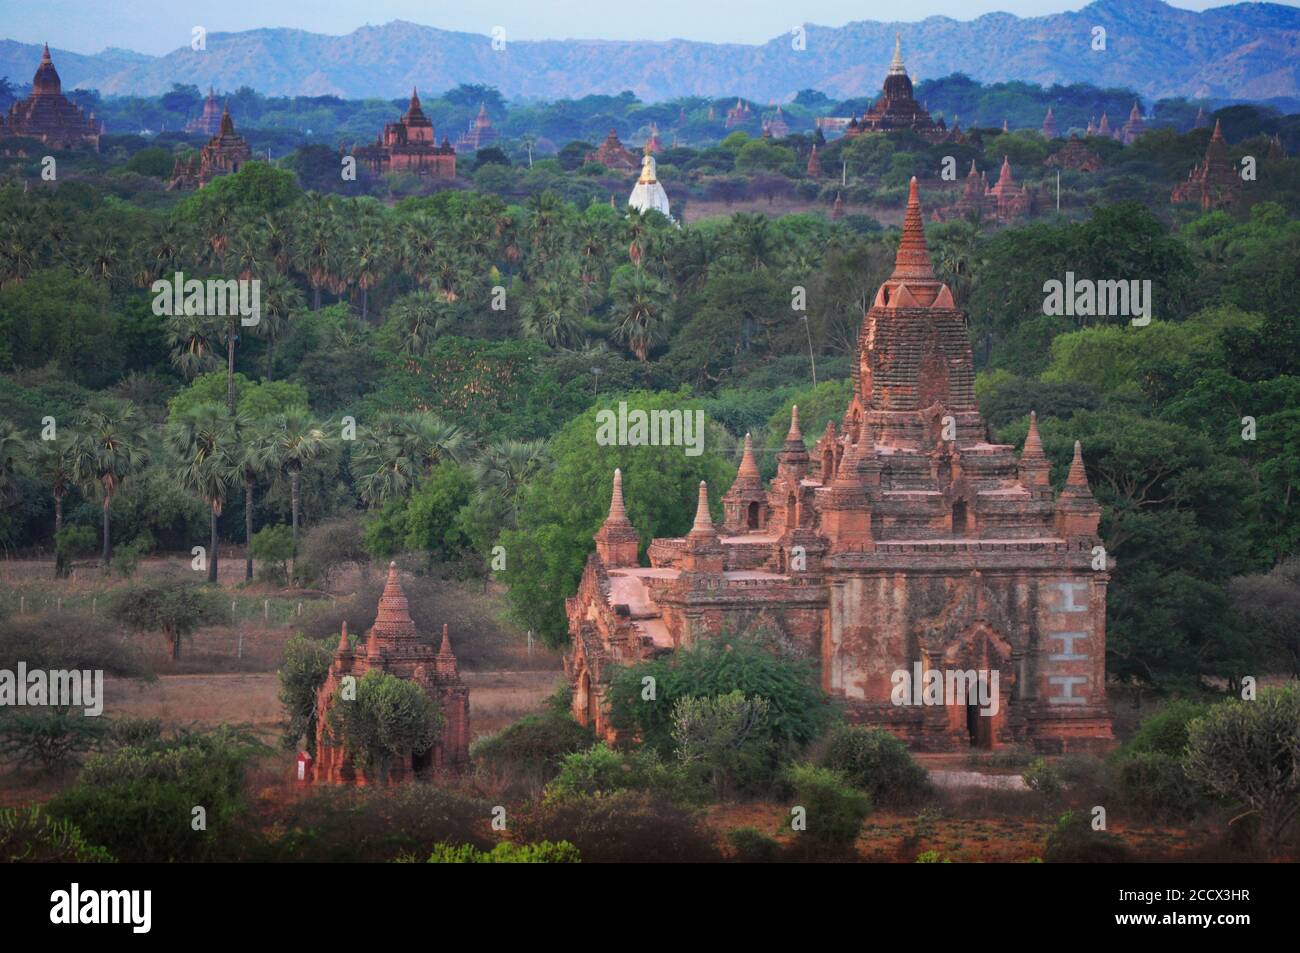 Old temples and Pagodas in Bagan Myanmar with lush trees Stock Photo